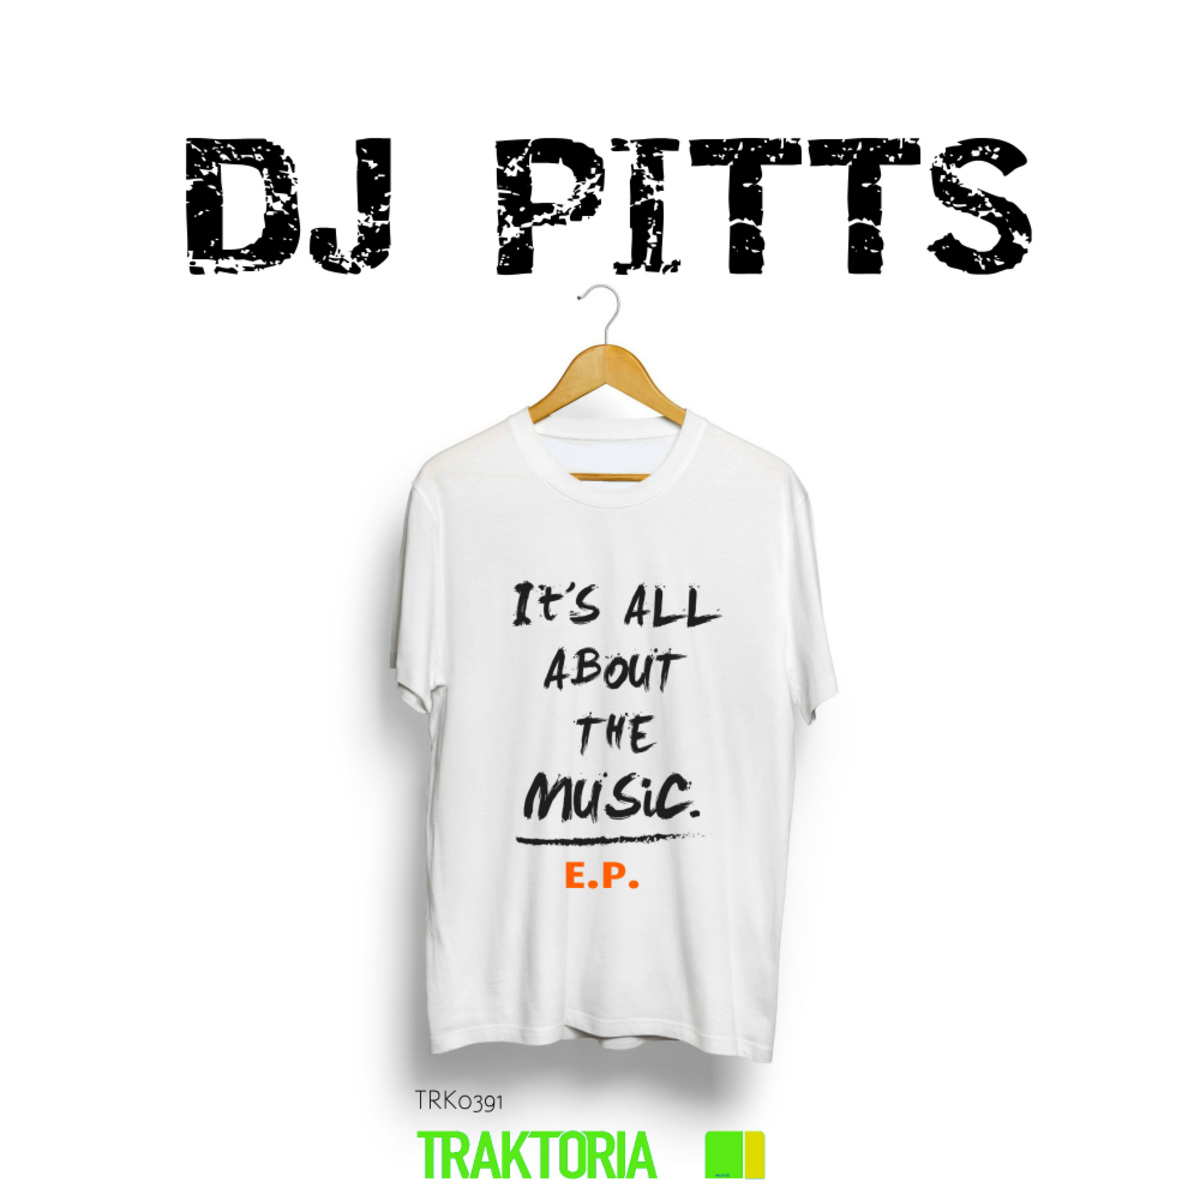 DJ Pitts - It's All About The Music E.P. / Traktoria